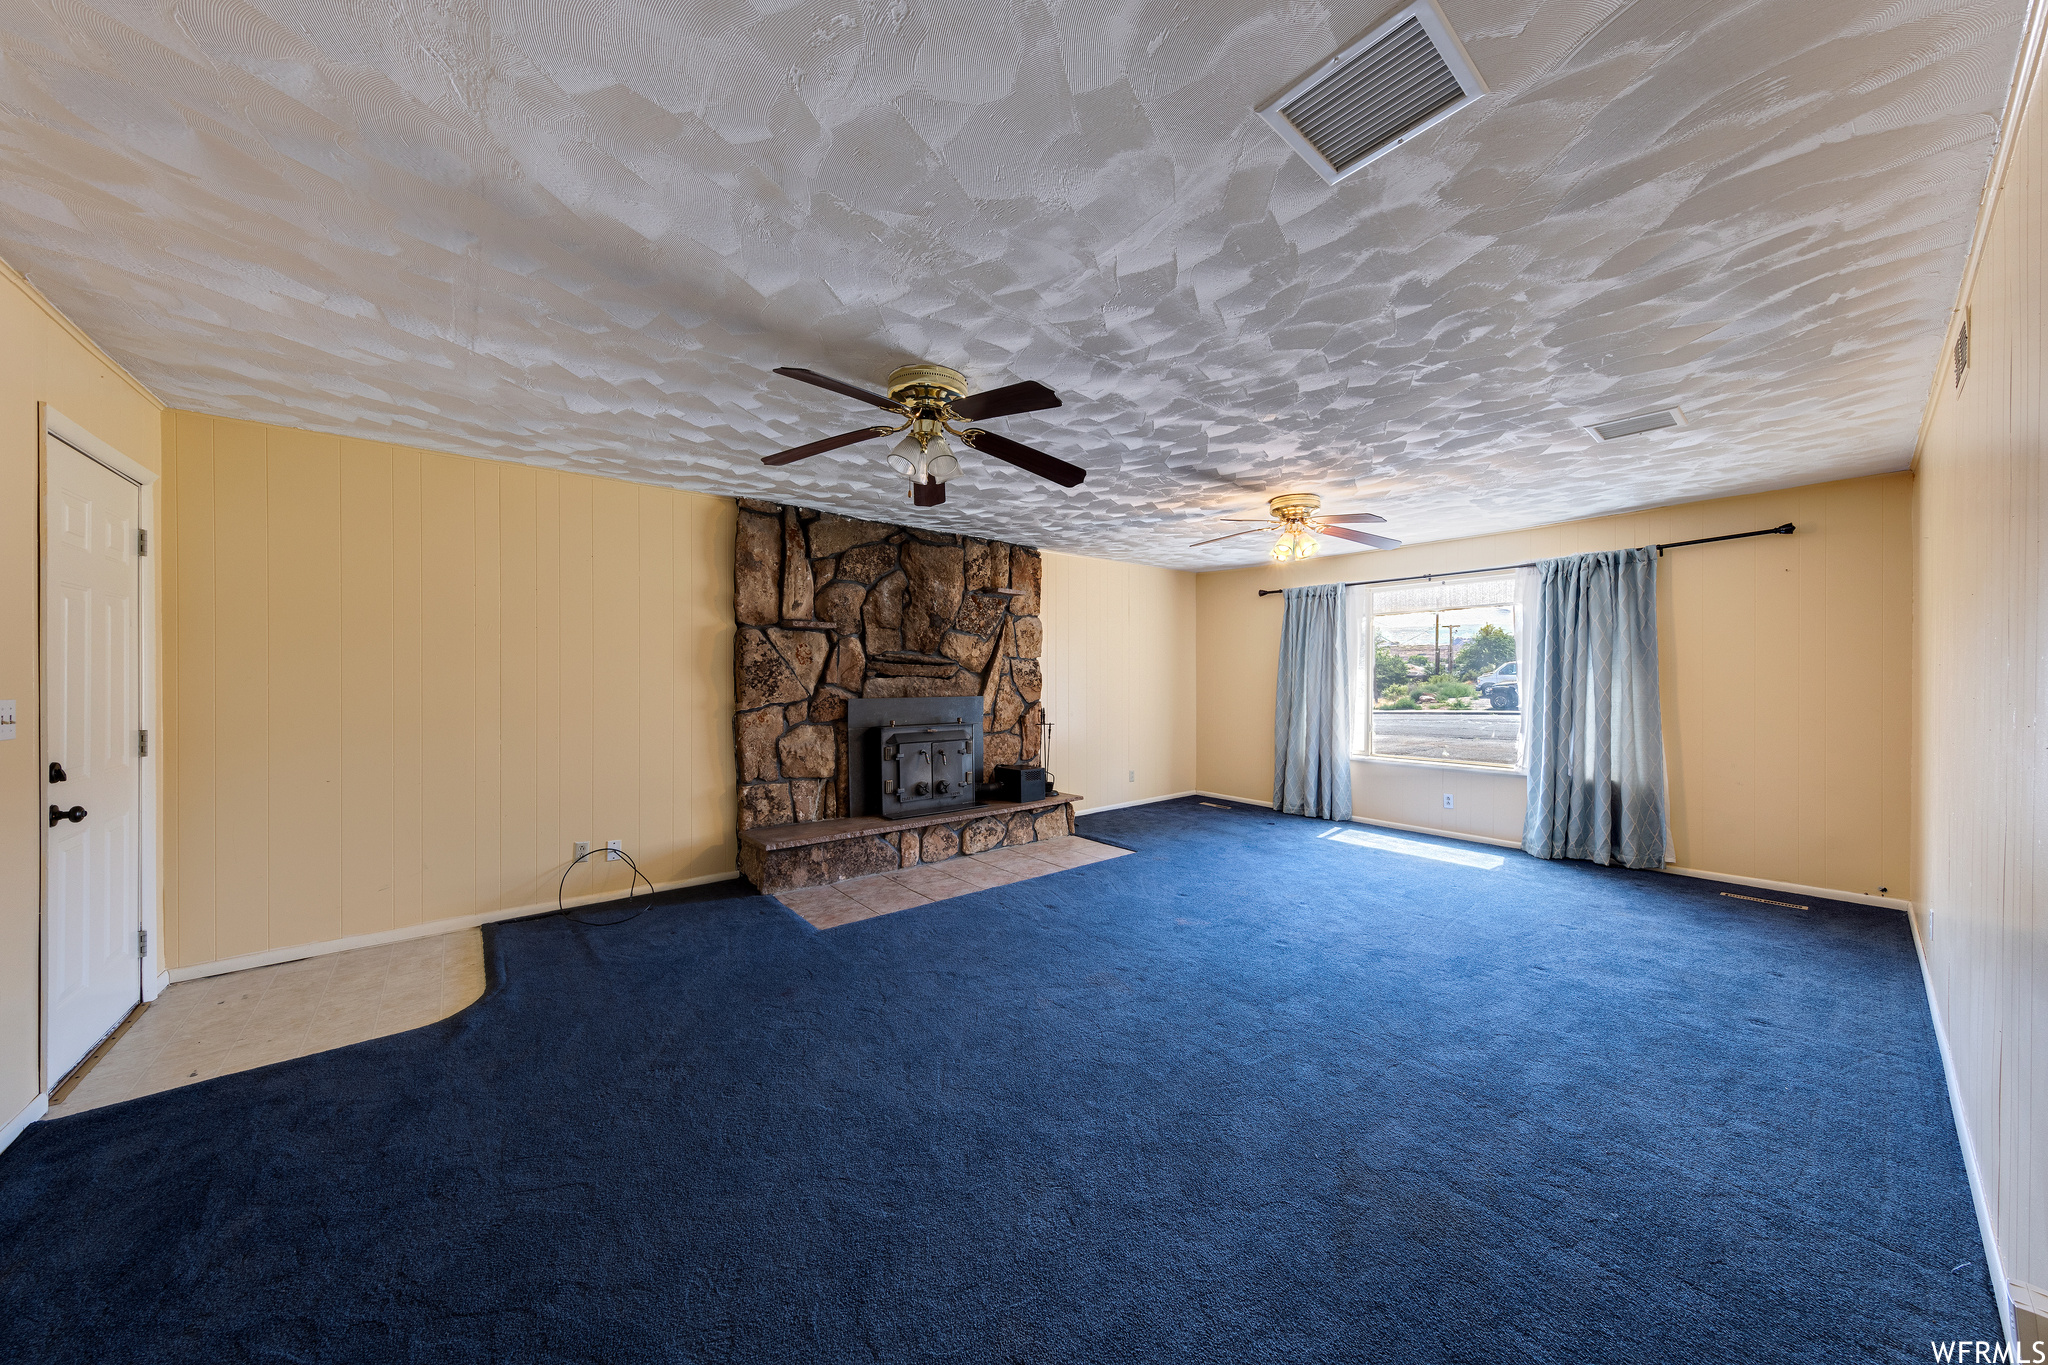 Carpeted living room with a fireplace, natural light, and a ceiling fan